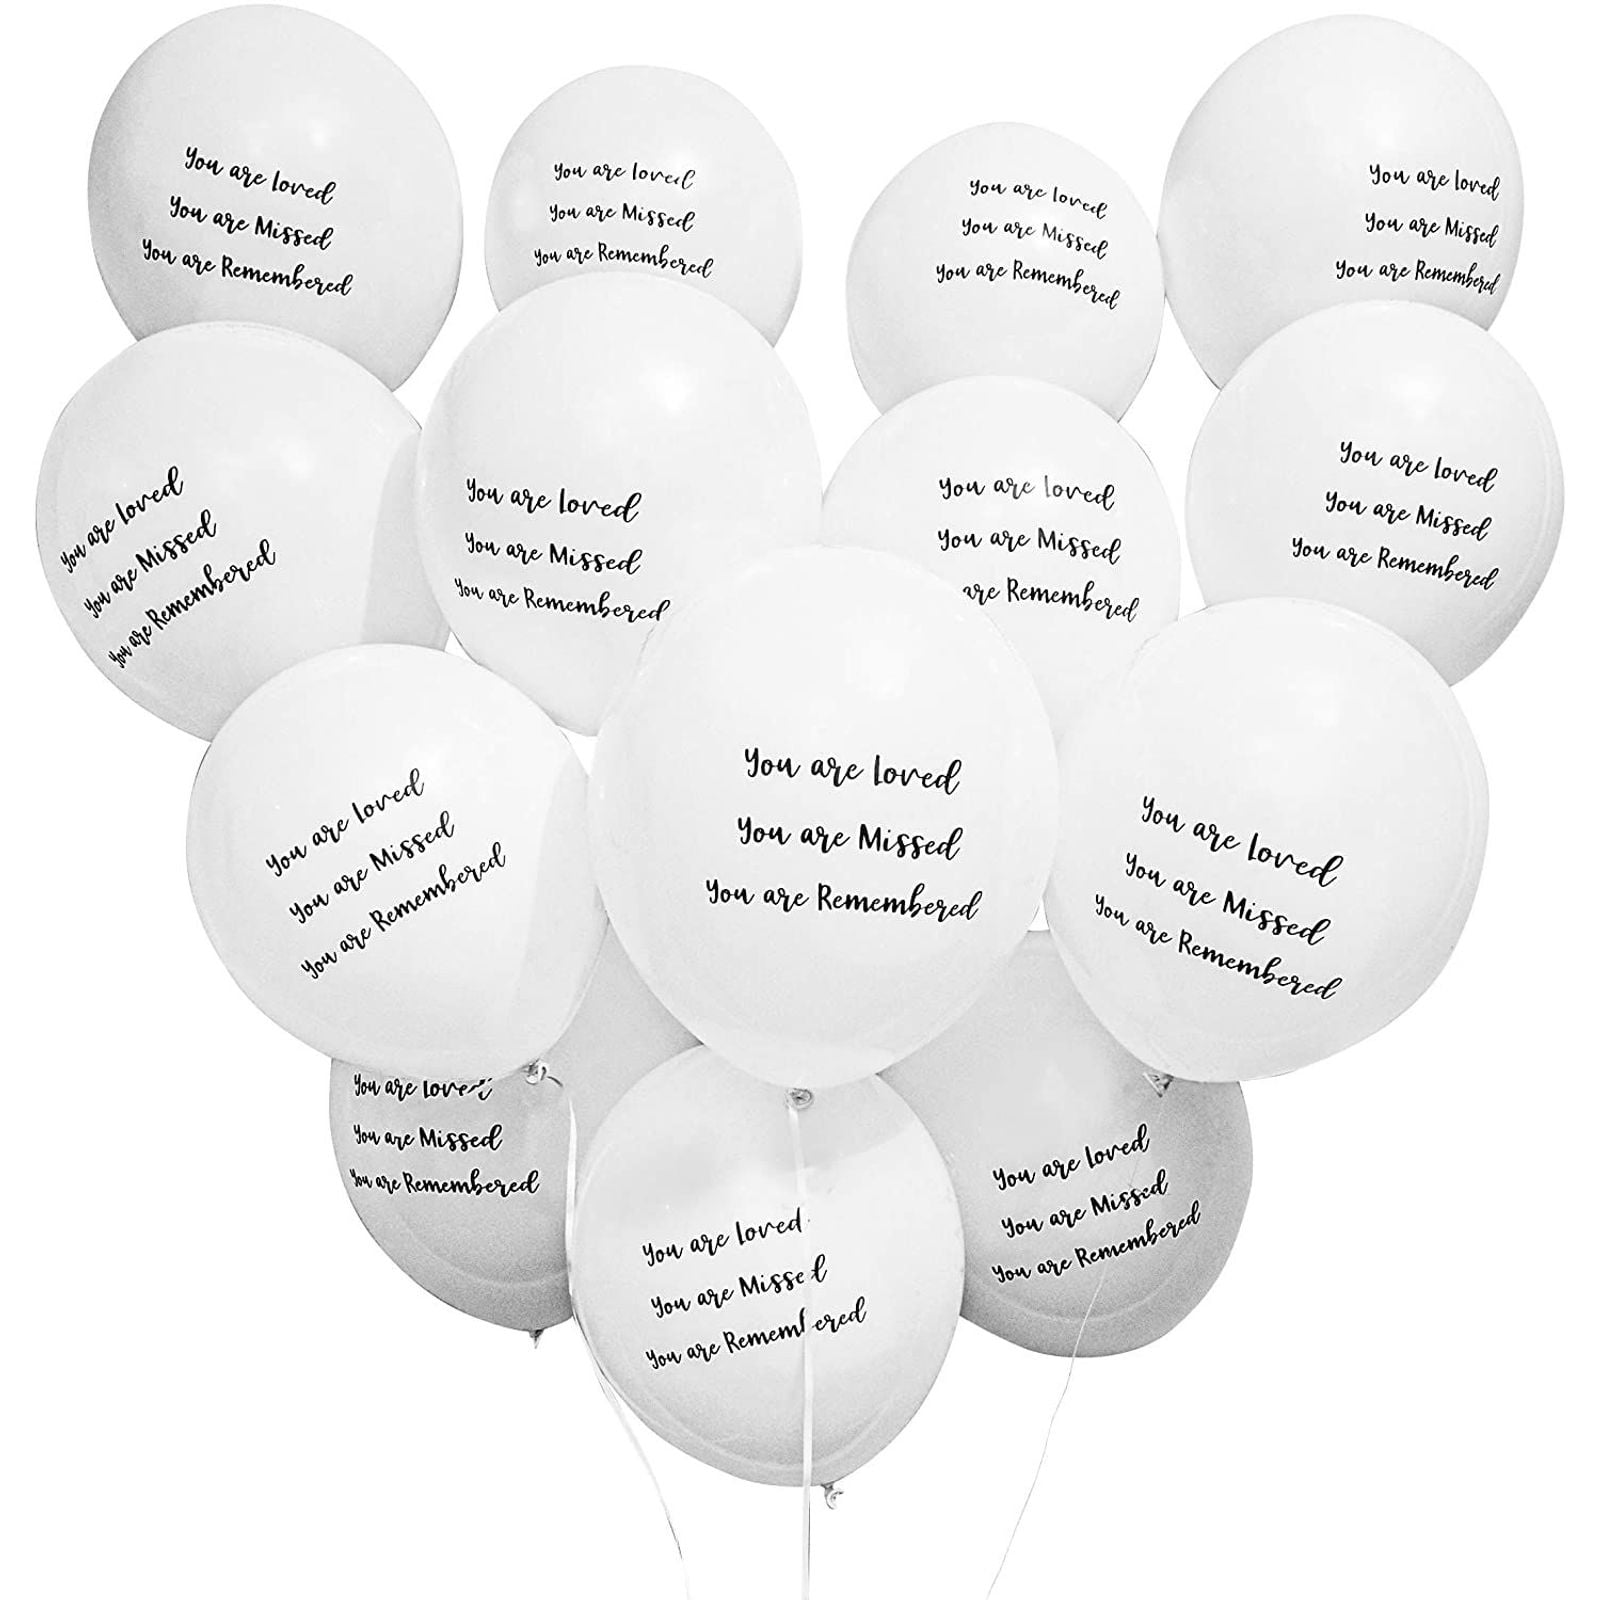 60 Pieces White Memorial Balloons Funeral Remembrance Biodegradable Balloons for 